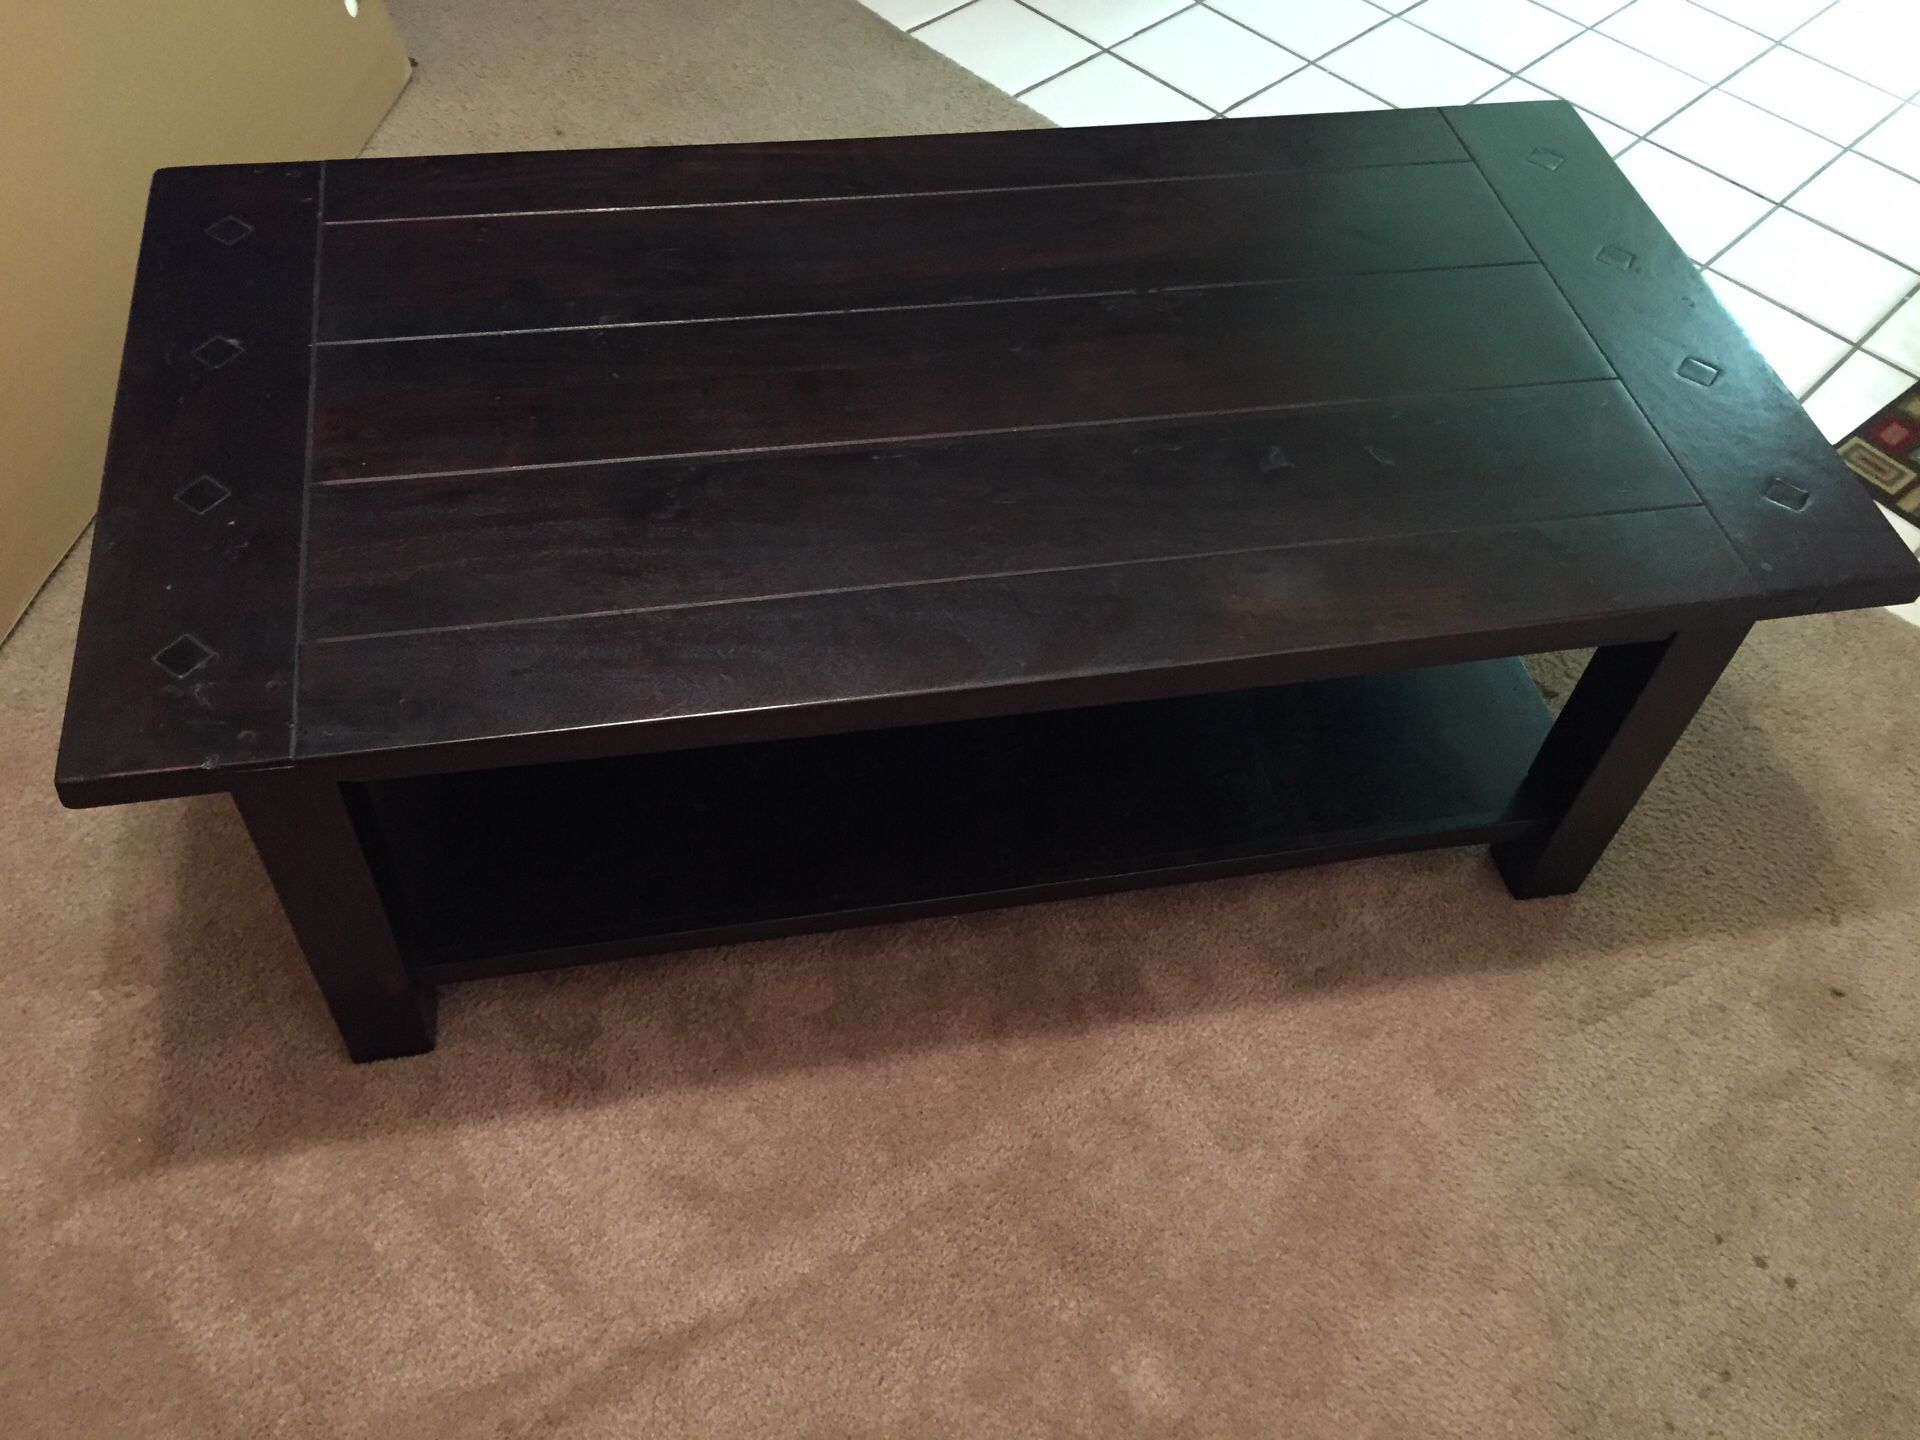 Living room table. Solid wood. Really heavy. Firm price. Purchased at pier 1 imports. 4ft x 2ft